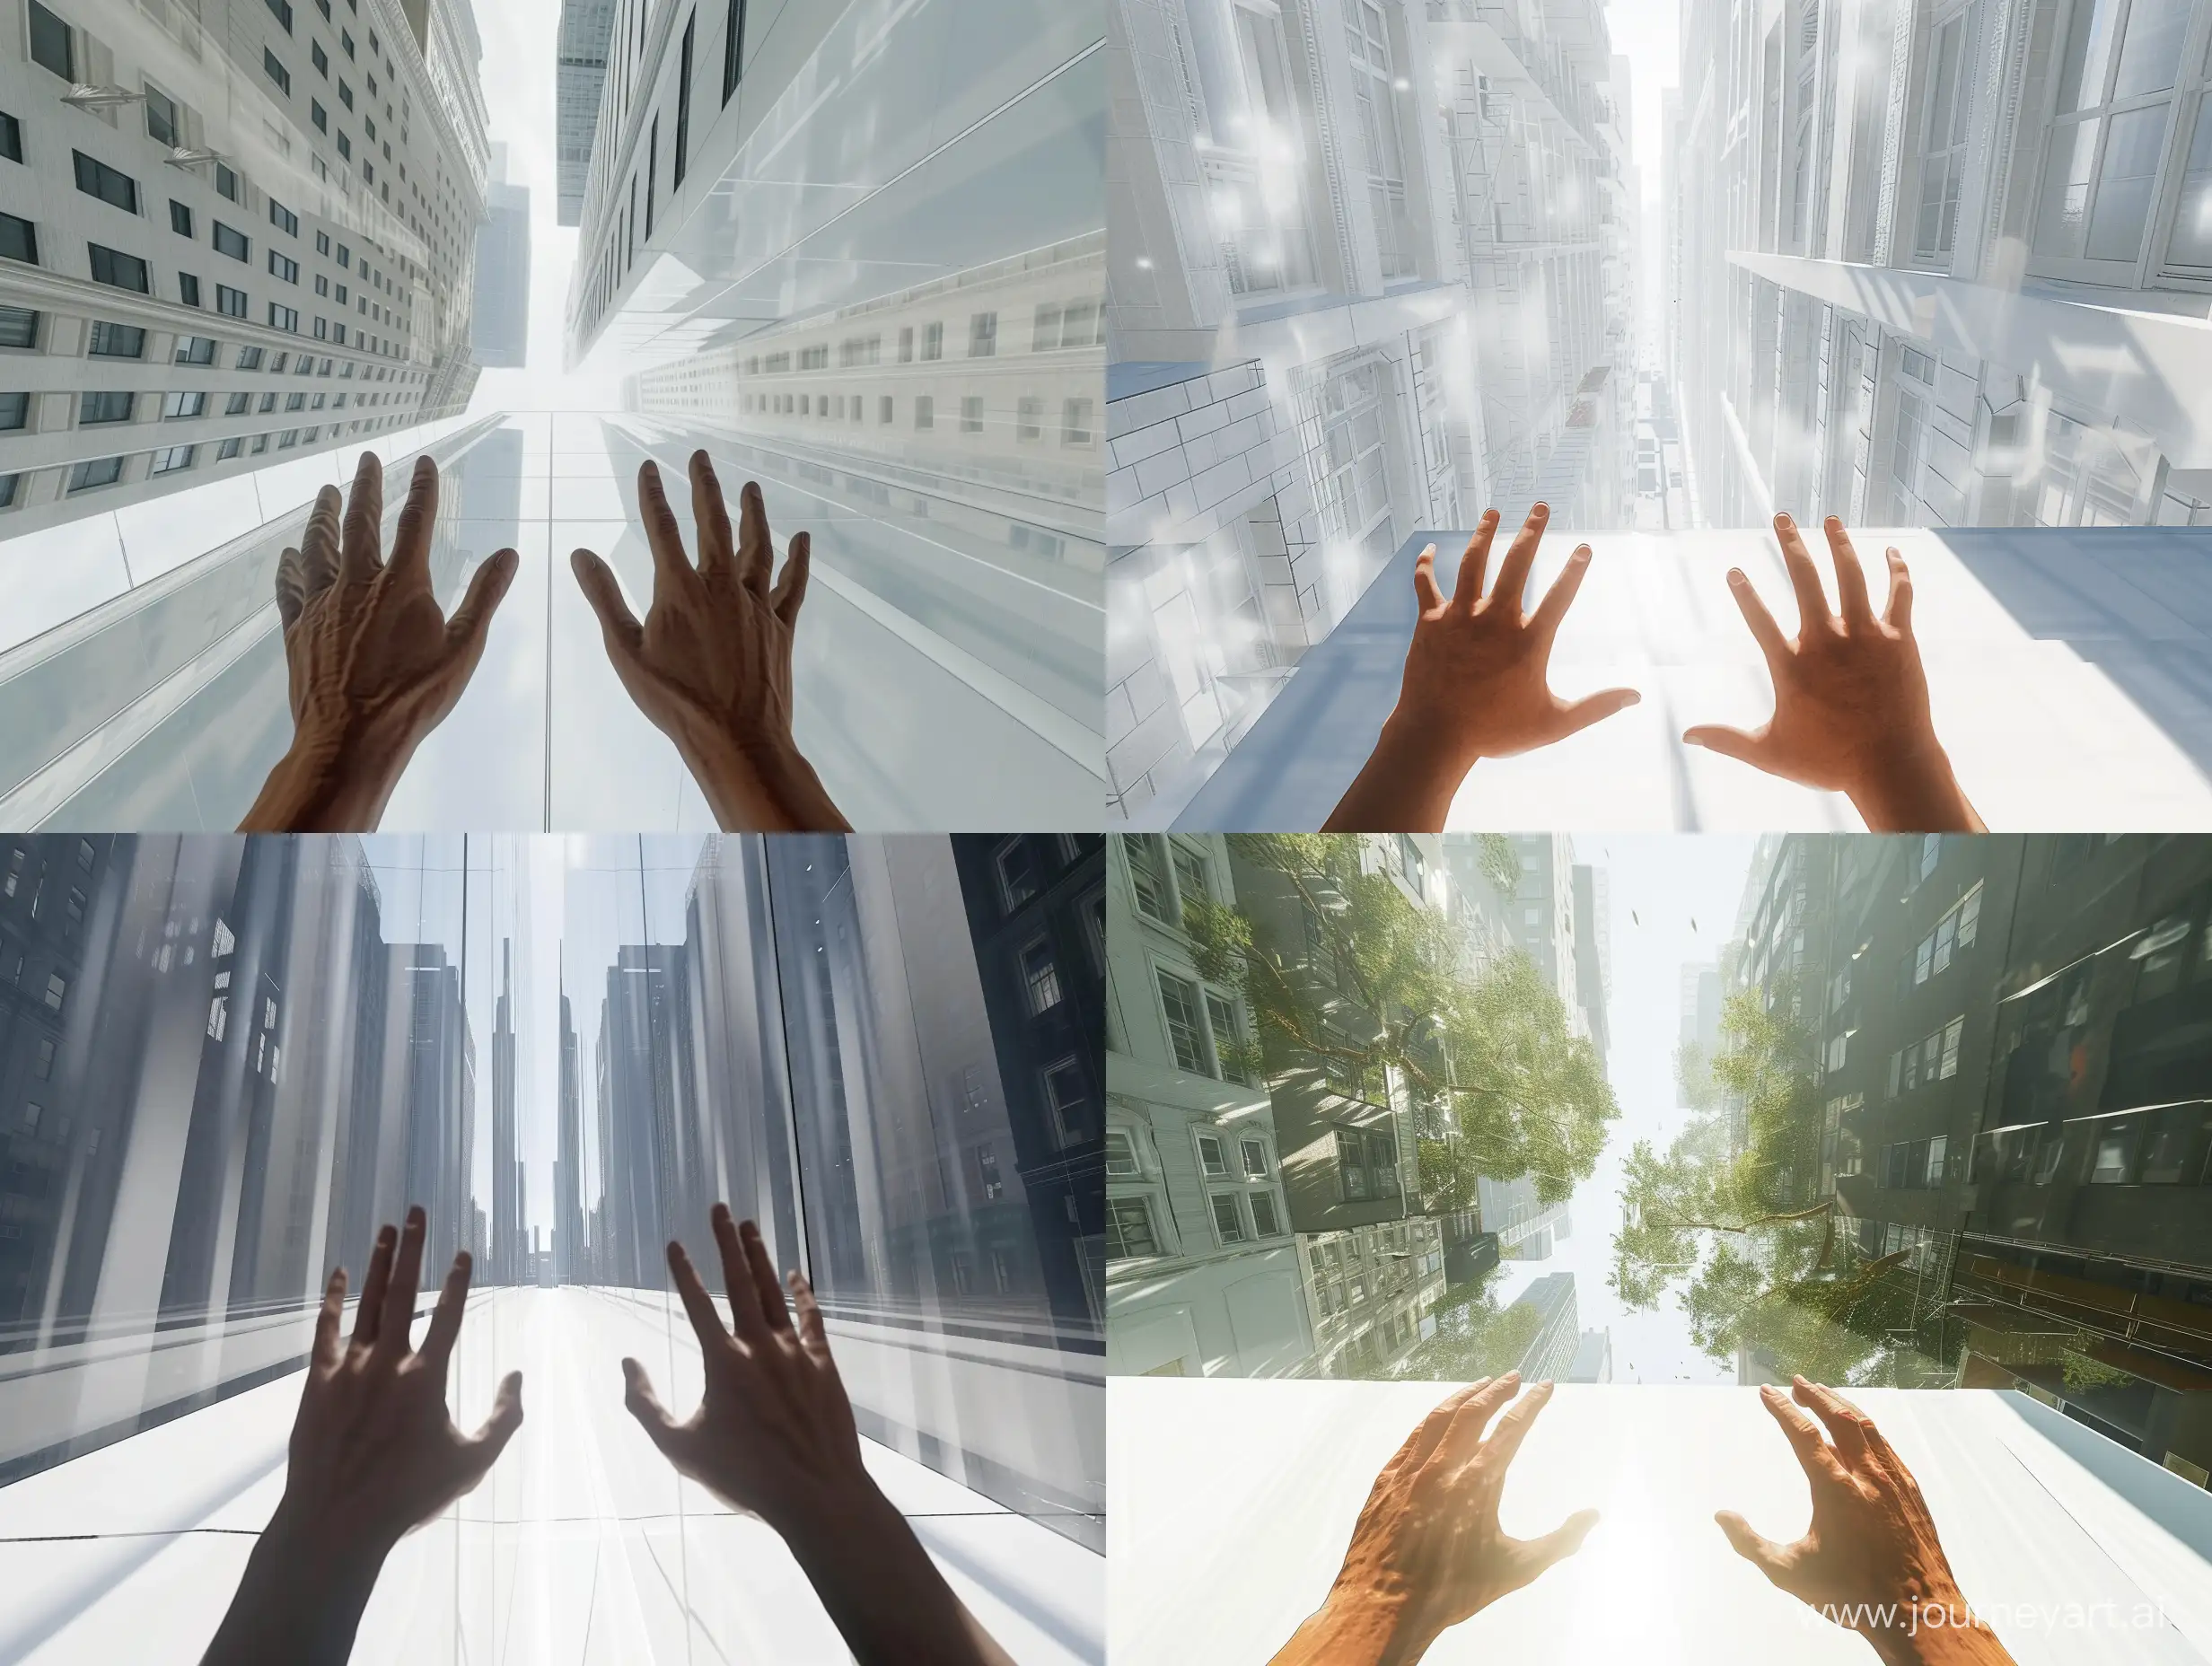 Capture images of the open world surroundings in Manhattan, New York, using natural sunlight. The images should be taken from a first-person viewpoint with hands visible at the bottom, while standing inside a white building looking through the glass.
